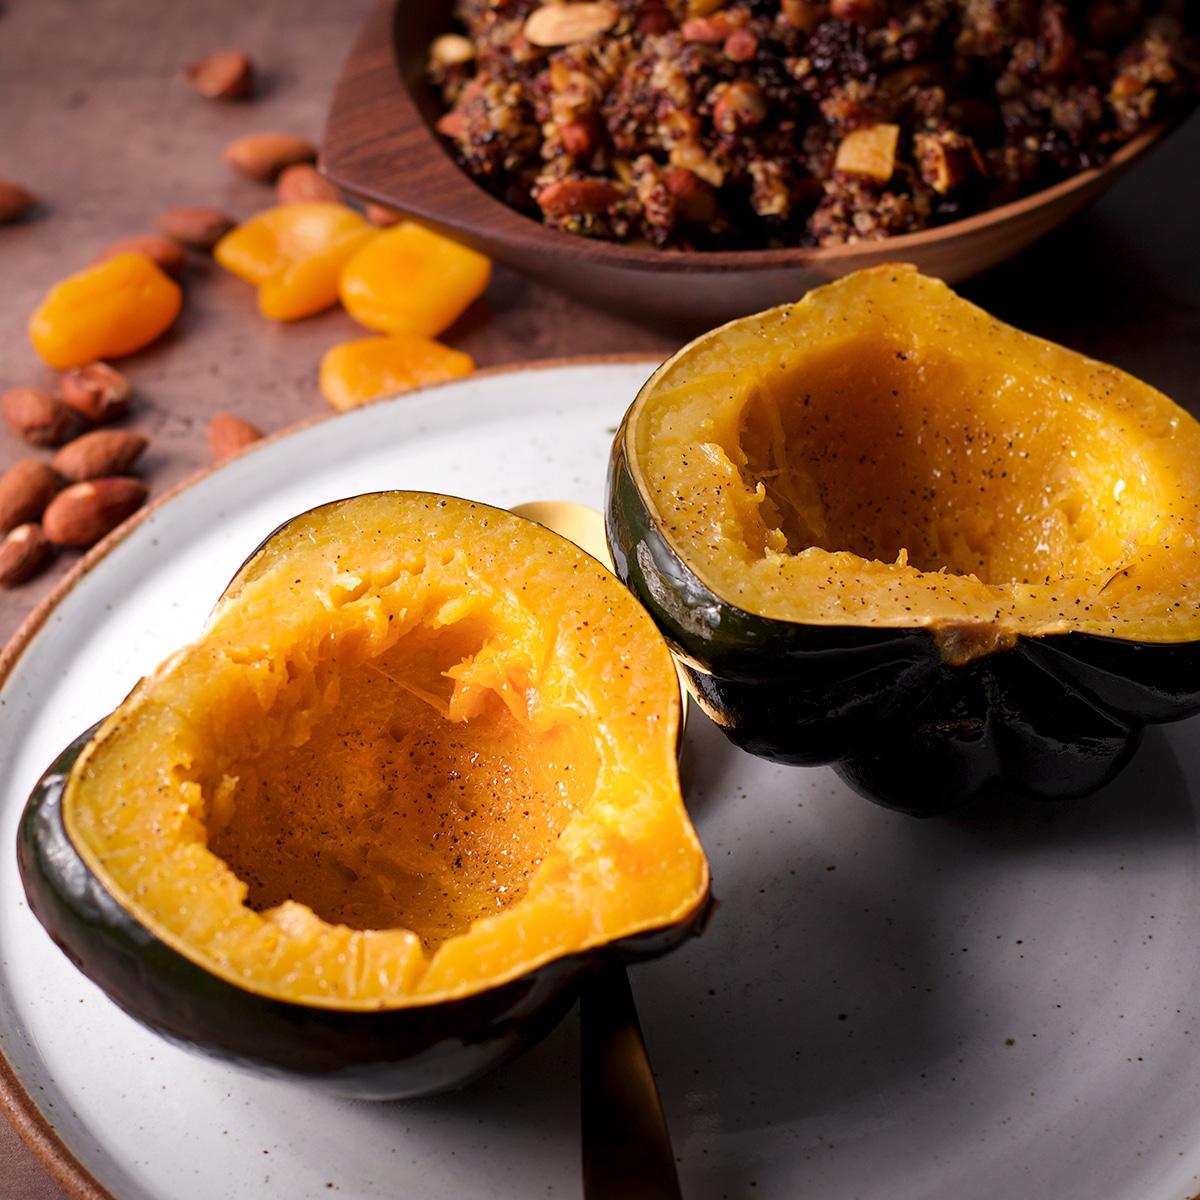 An acorn squash that's been cut in half and set, cut side up, on a white plate.